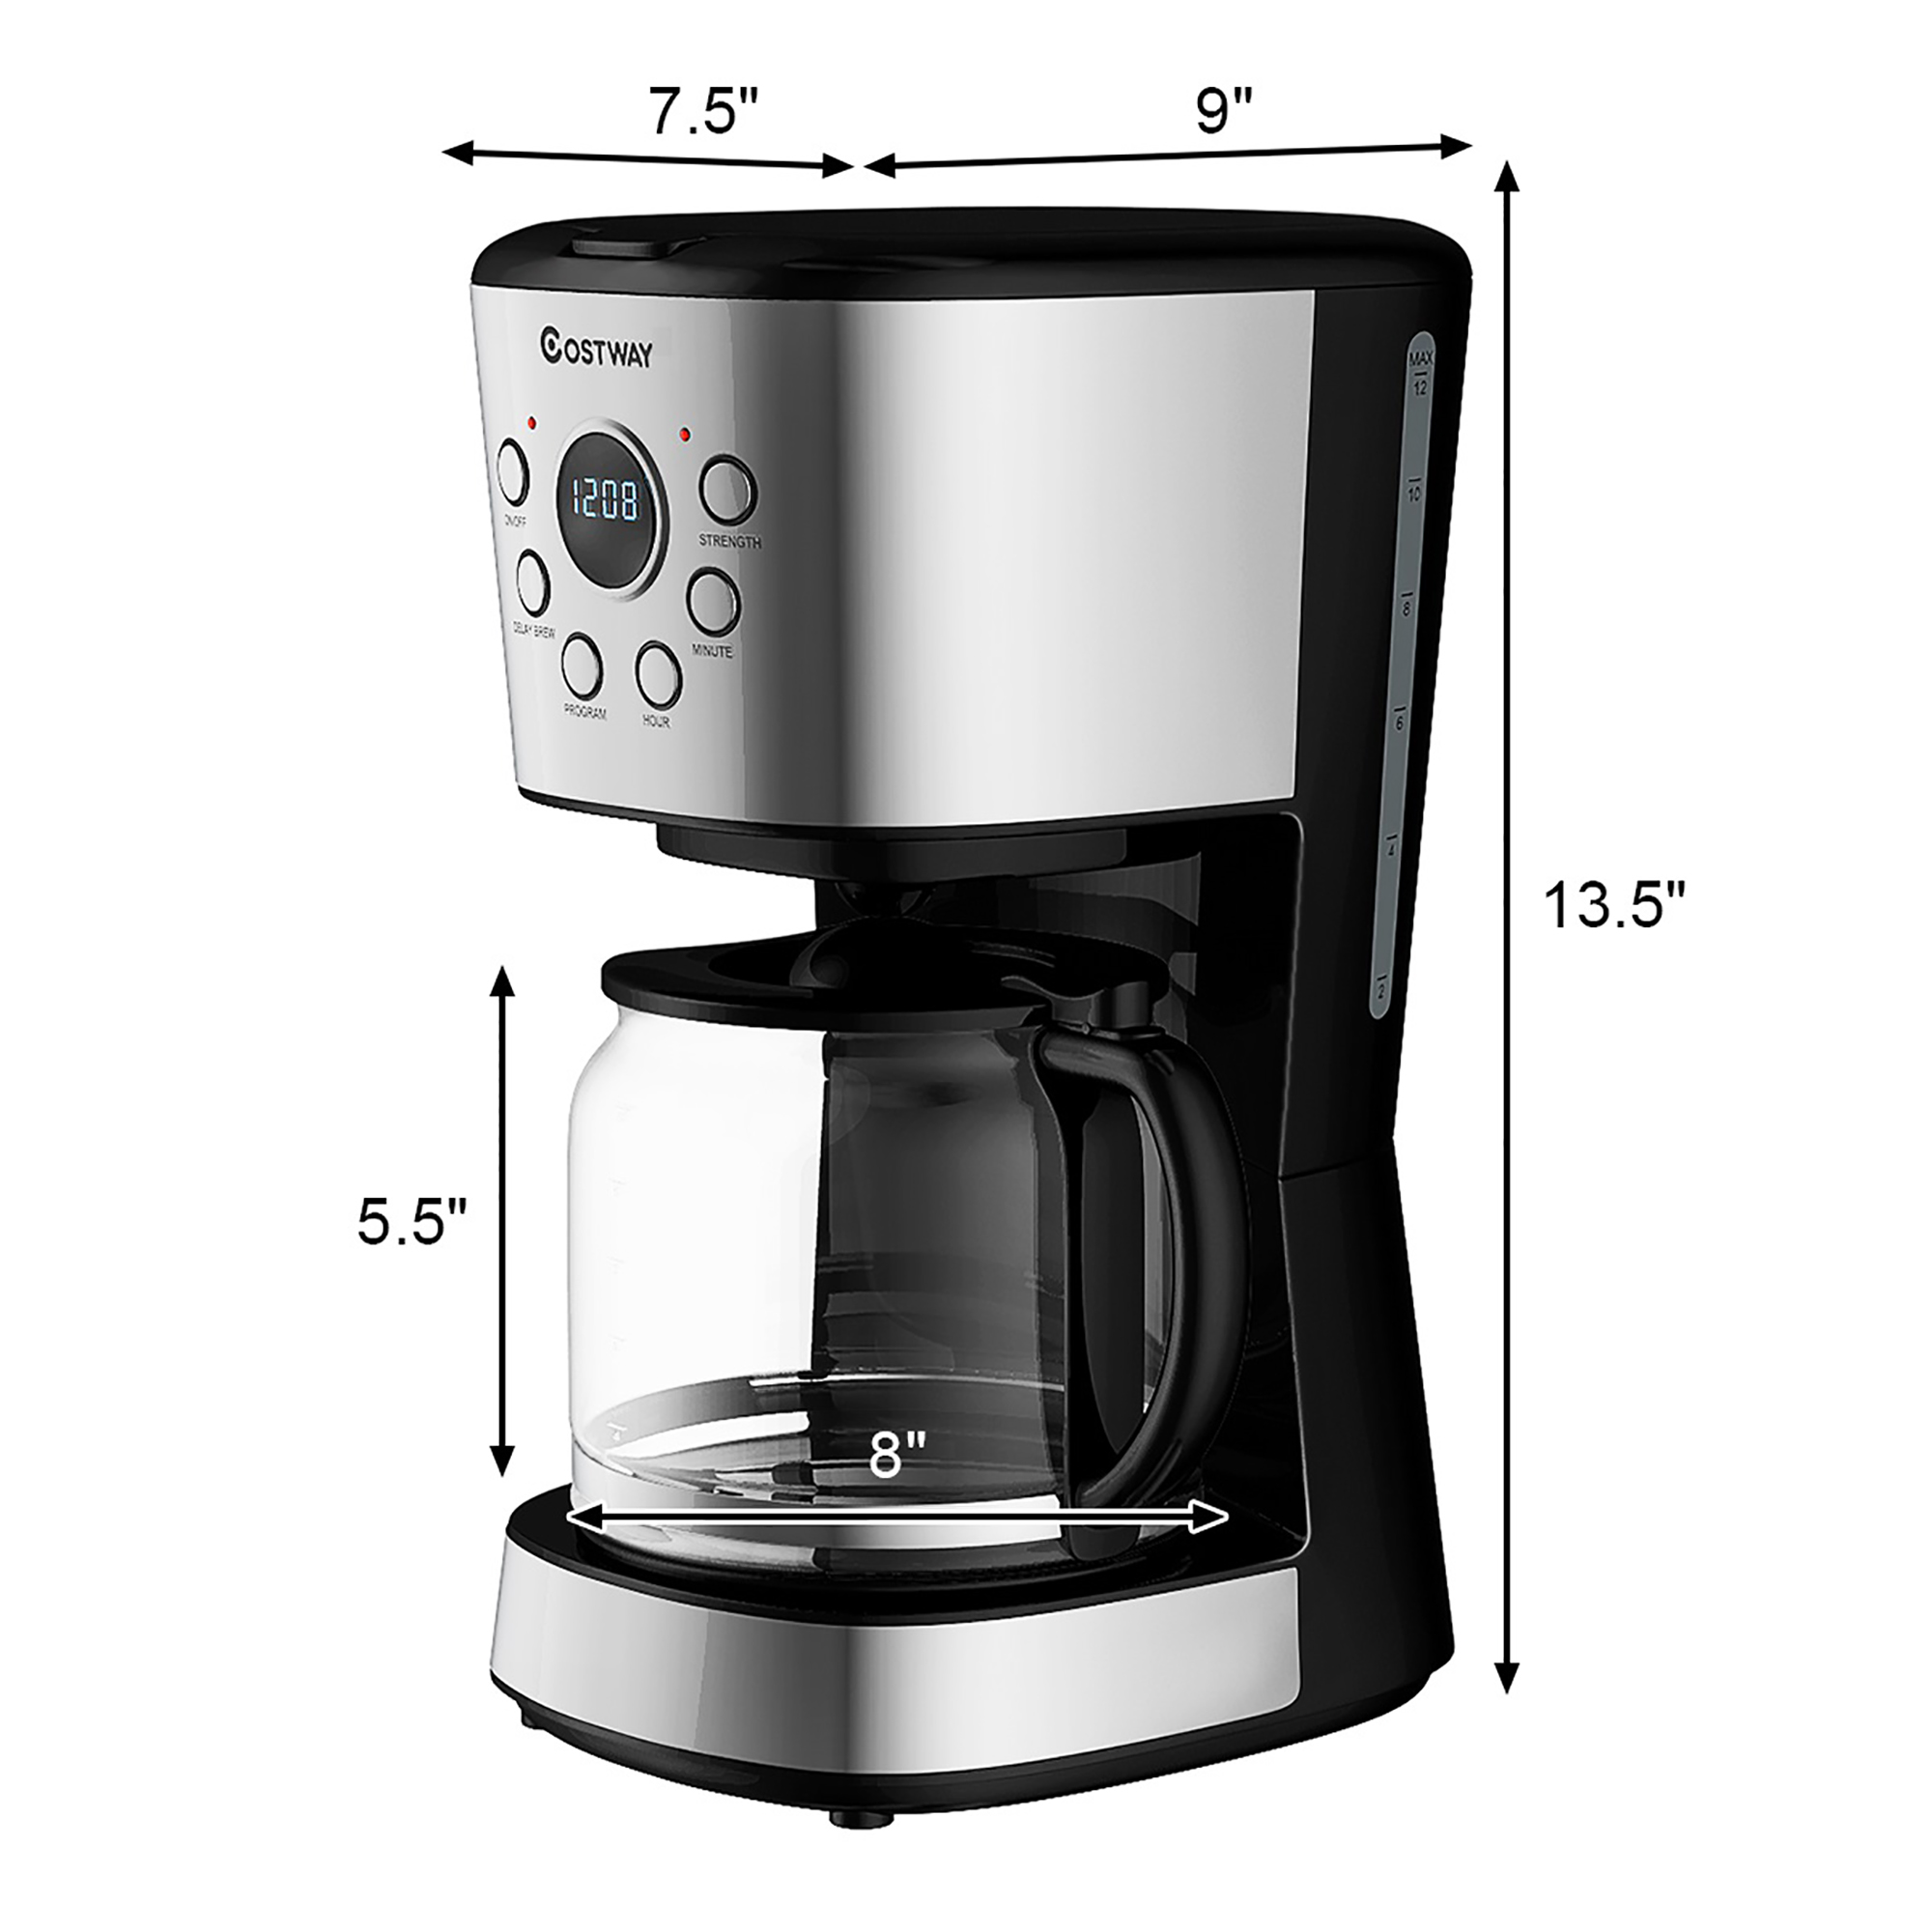 Costway 12-Cup Programmable Coffee Maker Brew Machine LCD Display w/ 1.8L Glass Carafe - image 2 of 10